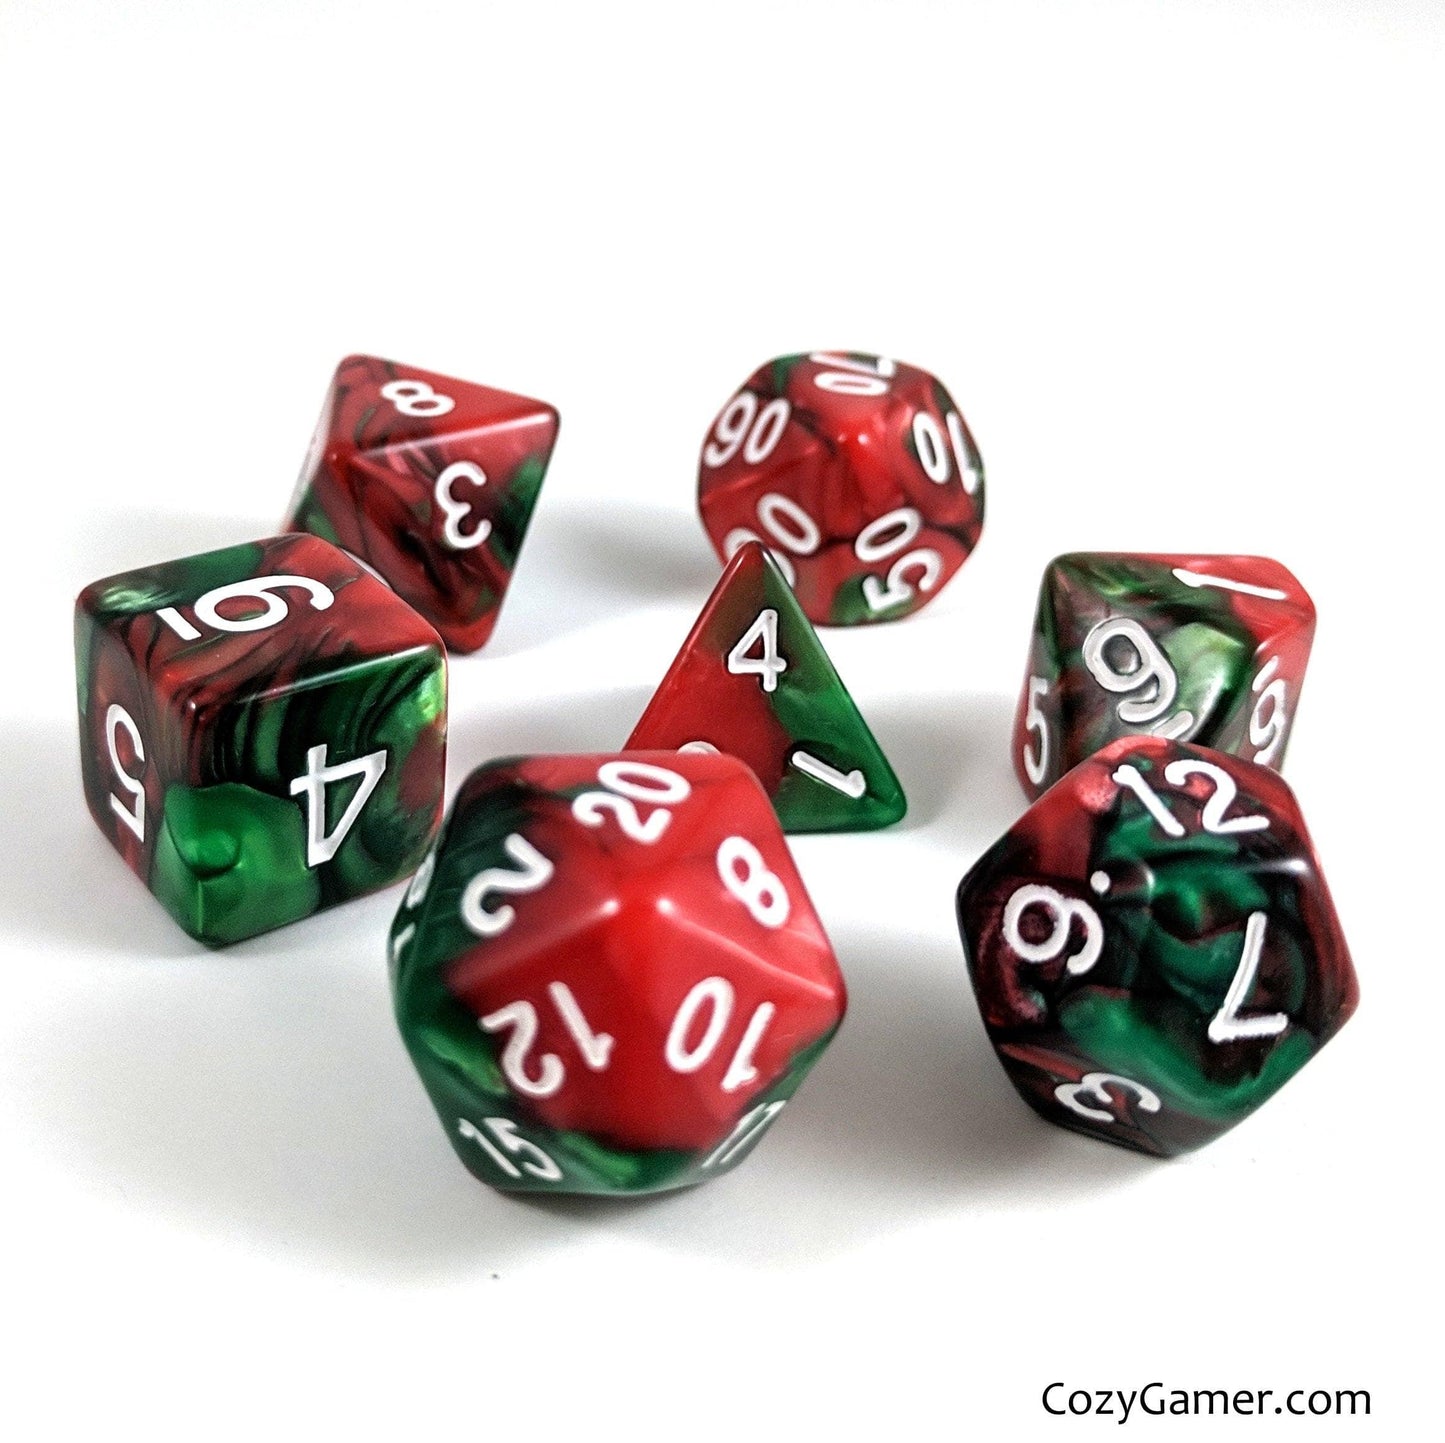 Sleigh Driver DnD Dice Set, Green and Red Pearl Marbled Dice - CozyGamer